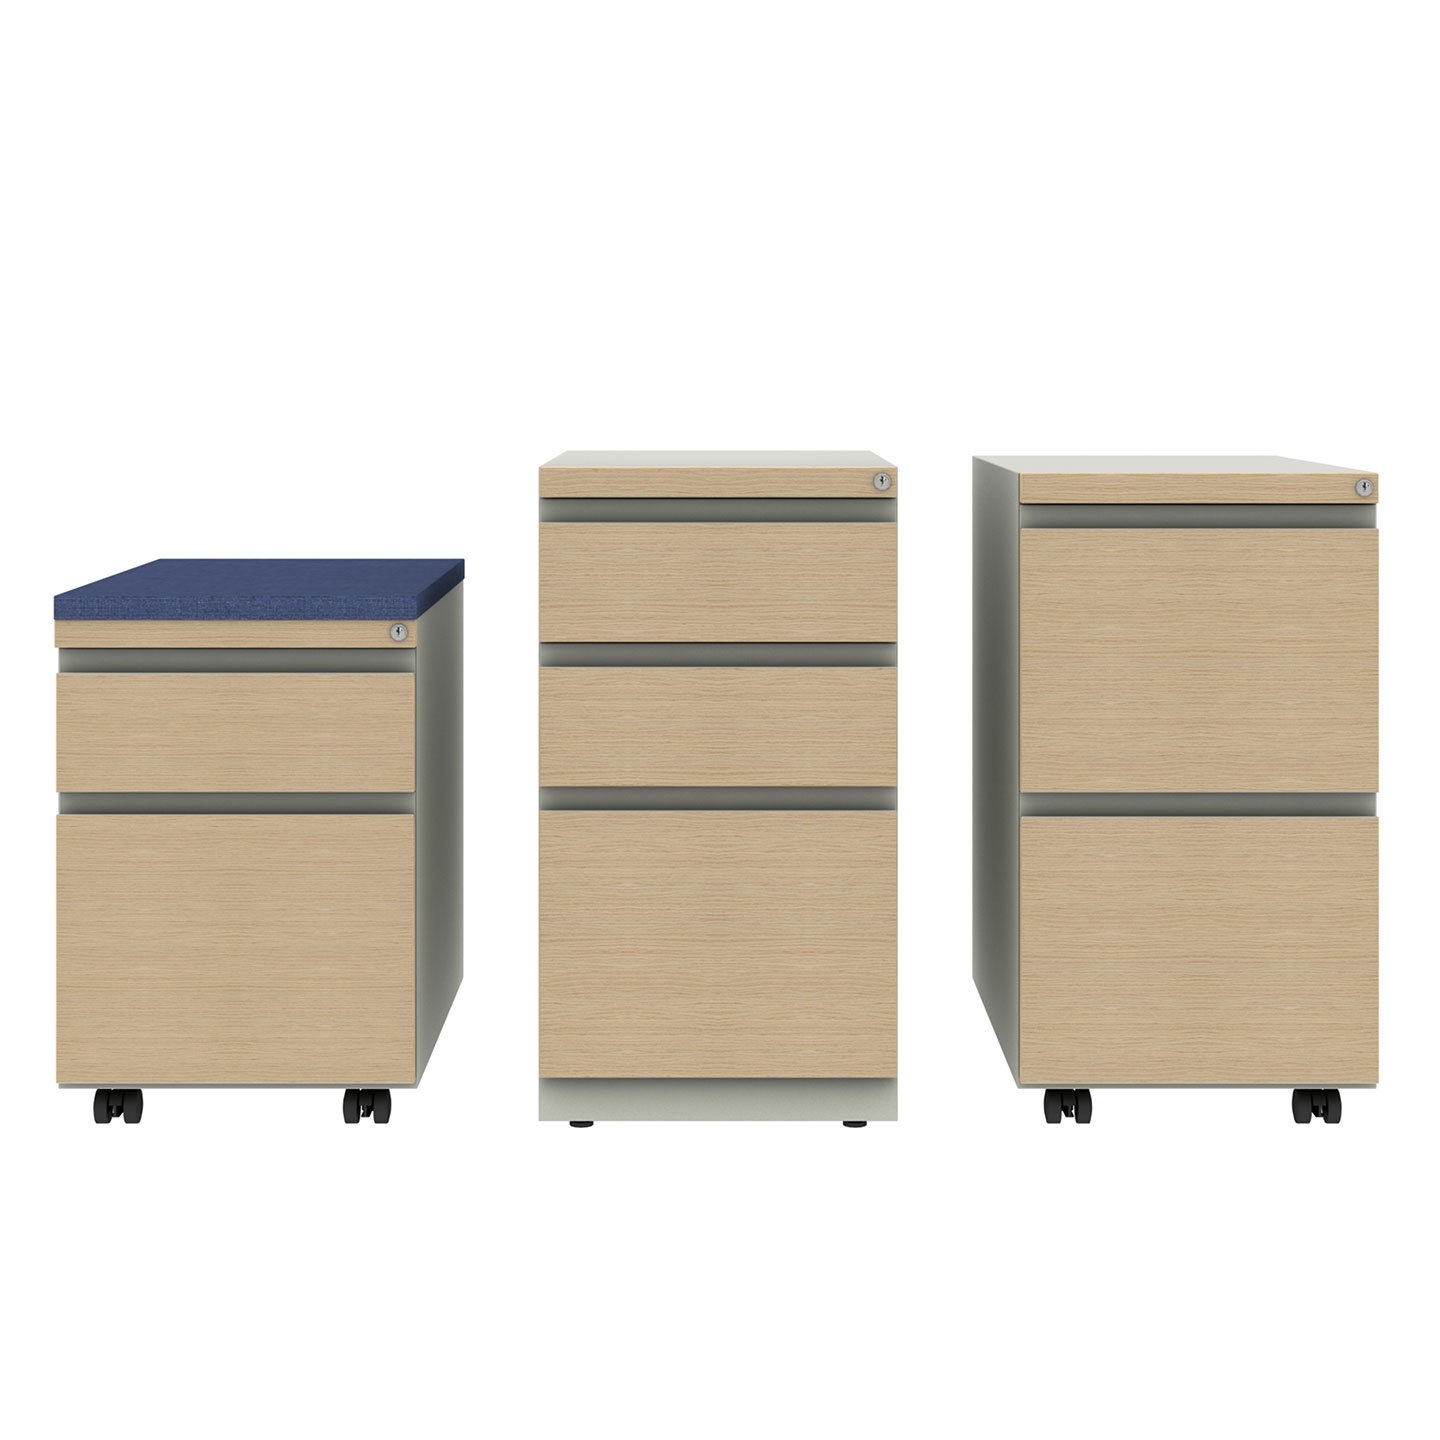 Three X Series storage pedestals with drawers and wheels